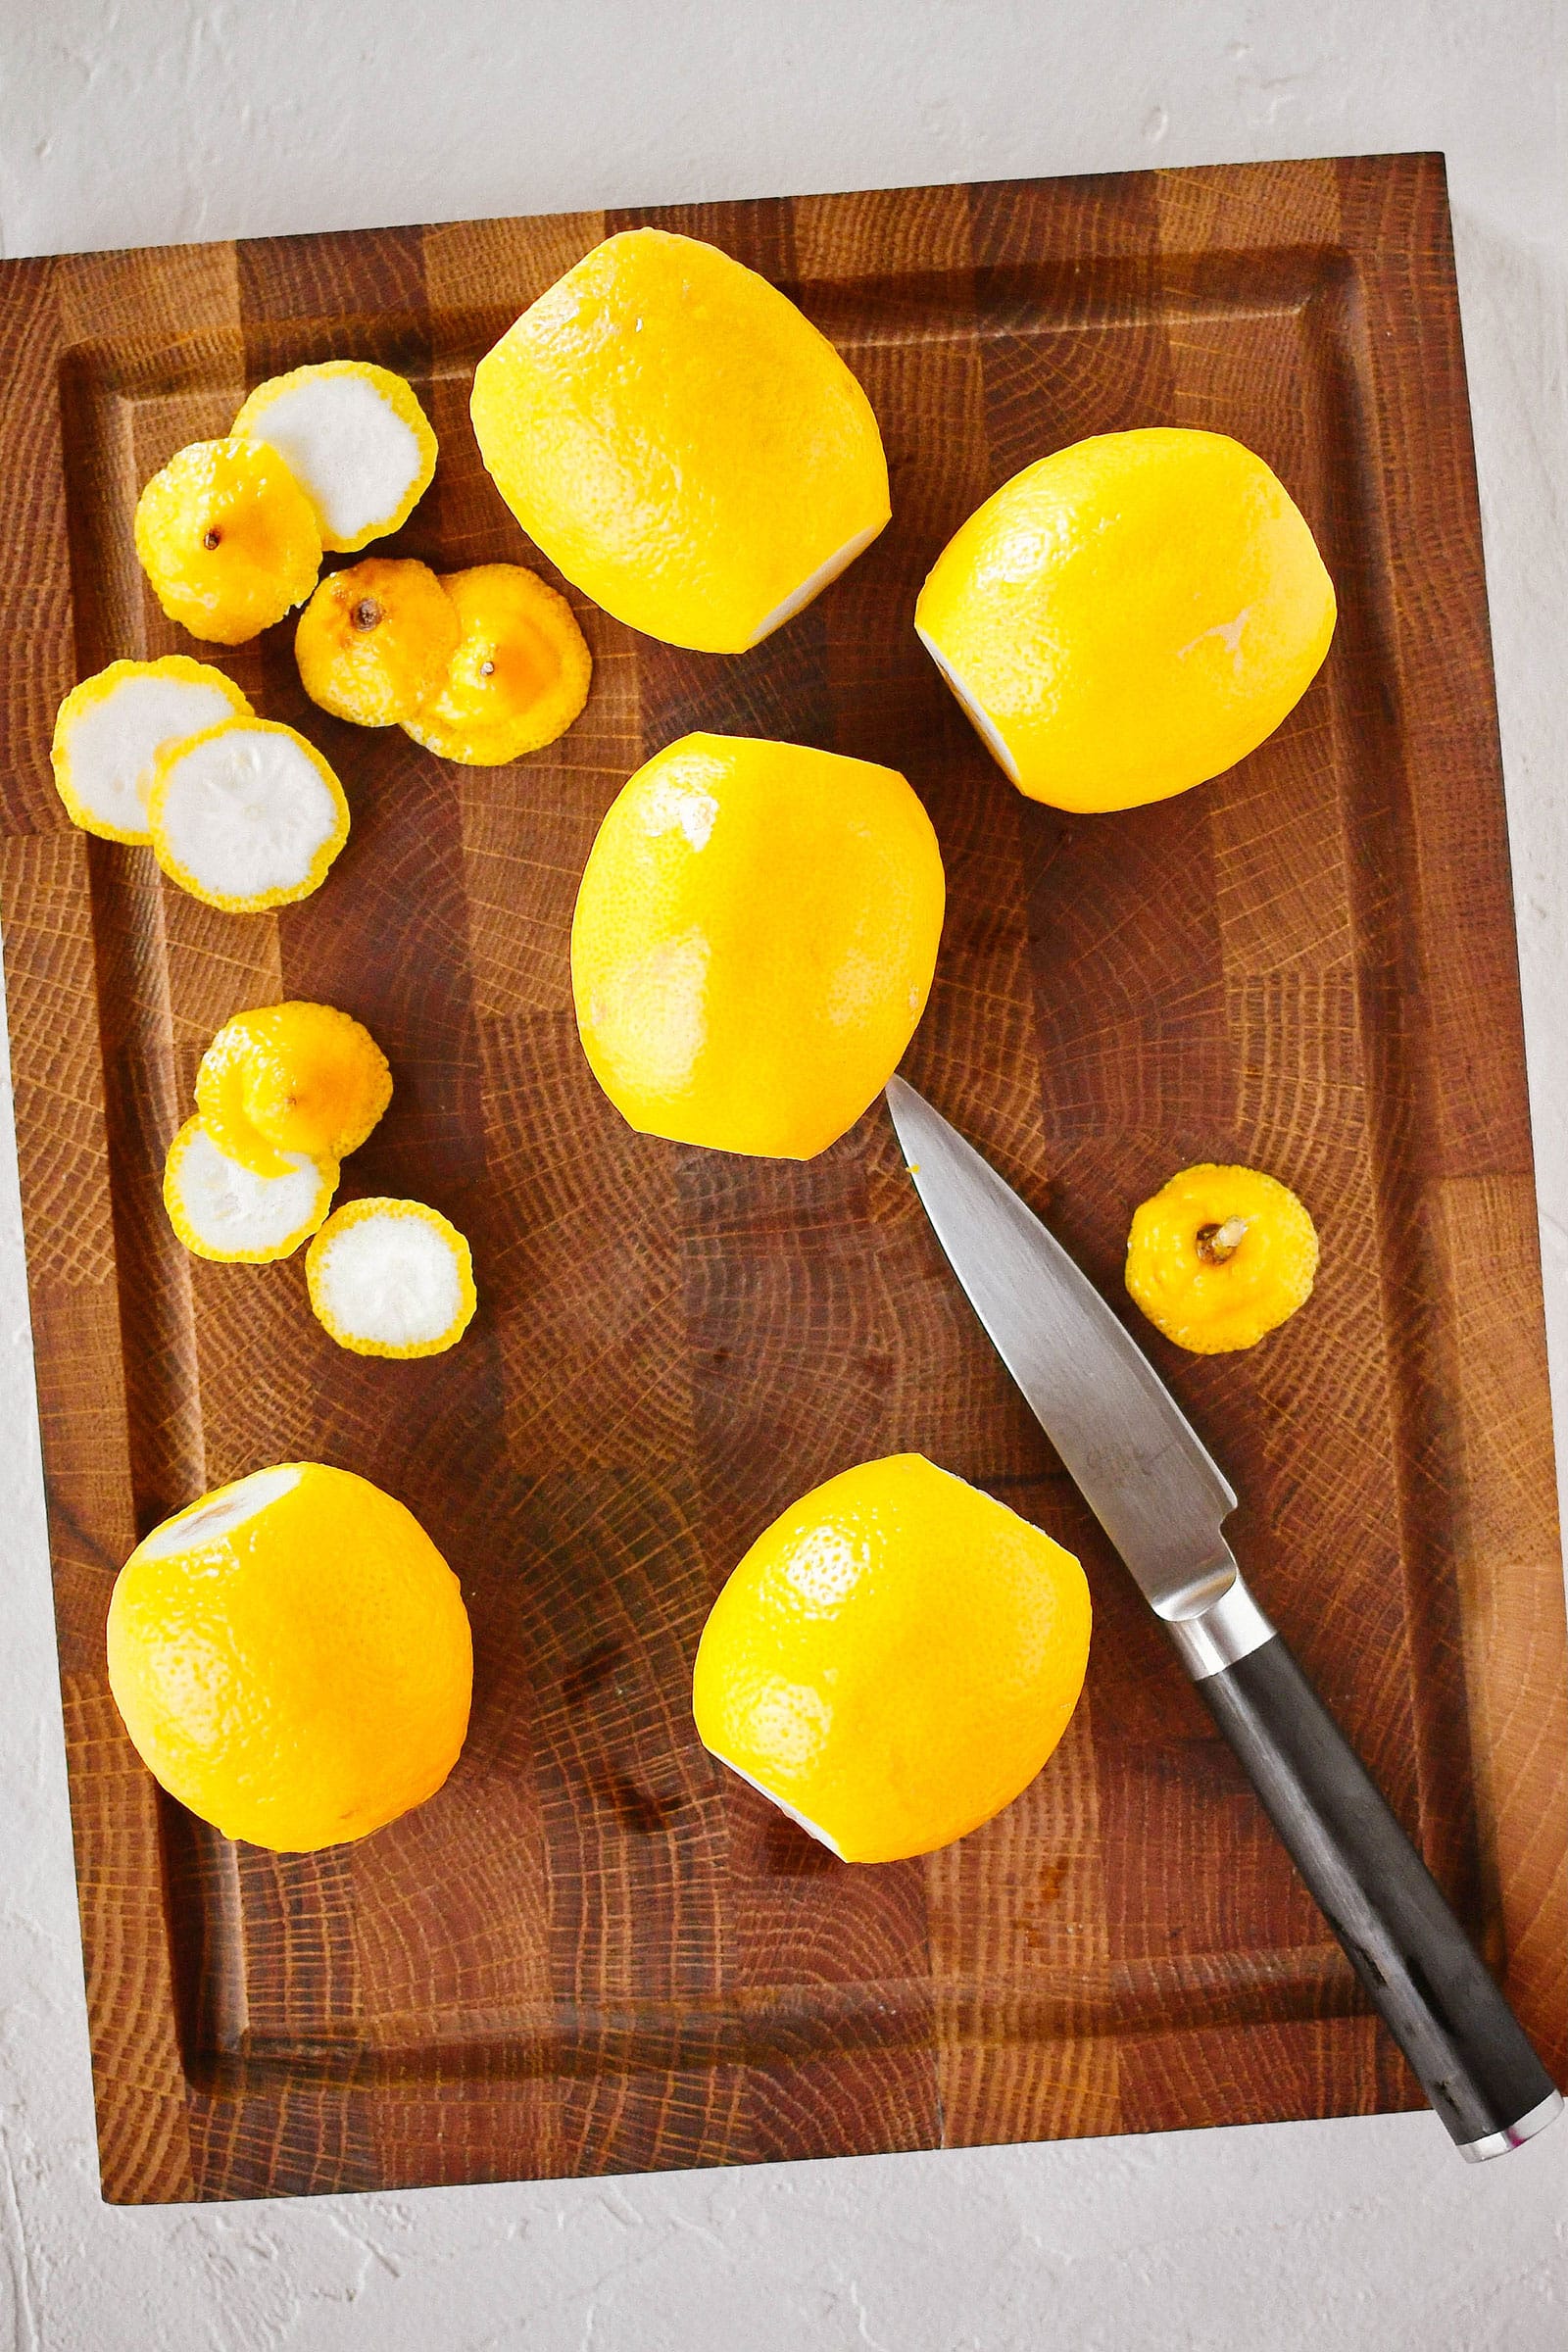 Lemons and a knife on a wooden cutting board, with the ends cut off on each lemon